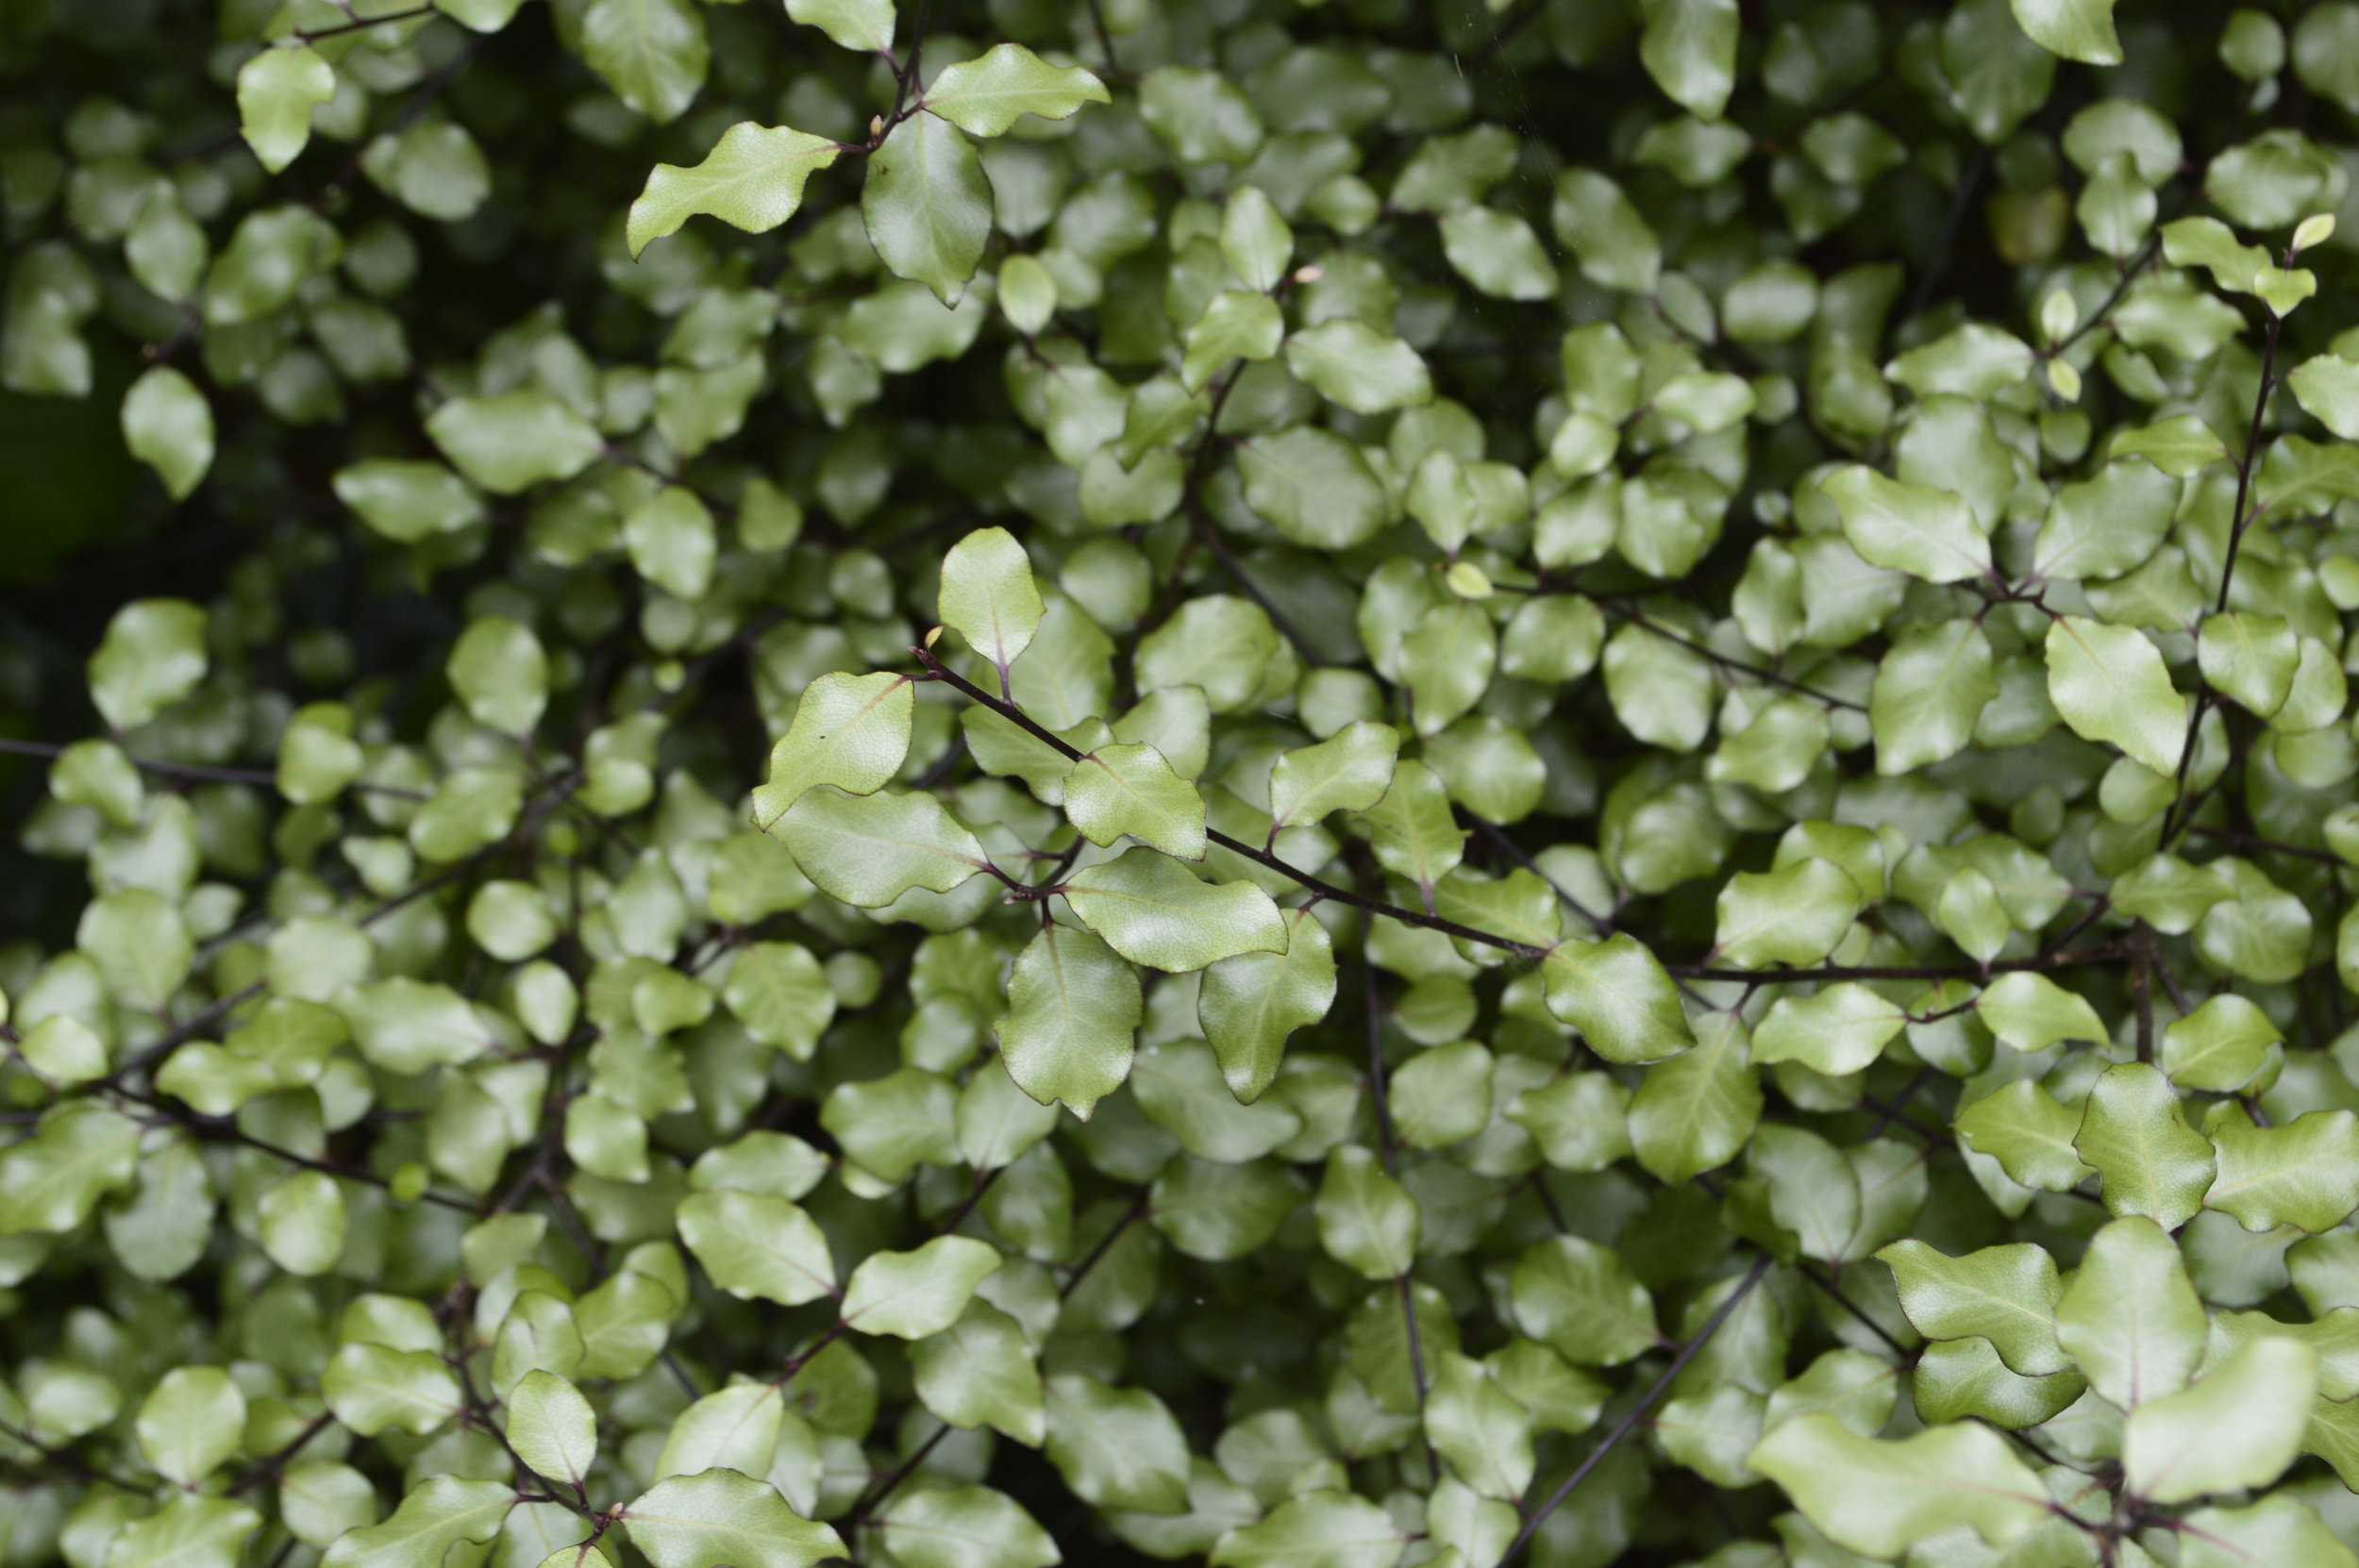 Dots - the small leaf of the pittosporum creating dots of light against the shaded backdrop